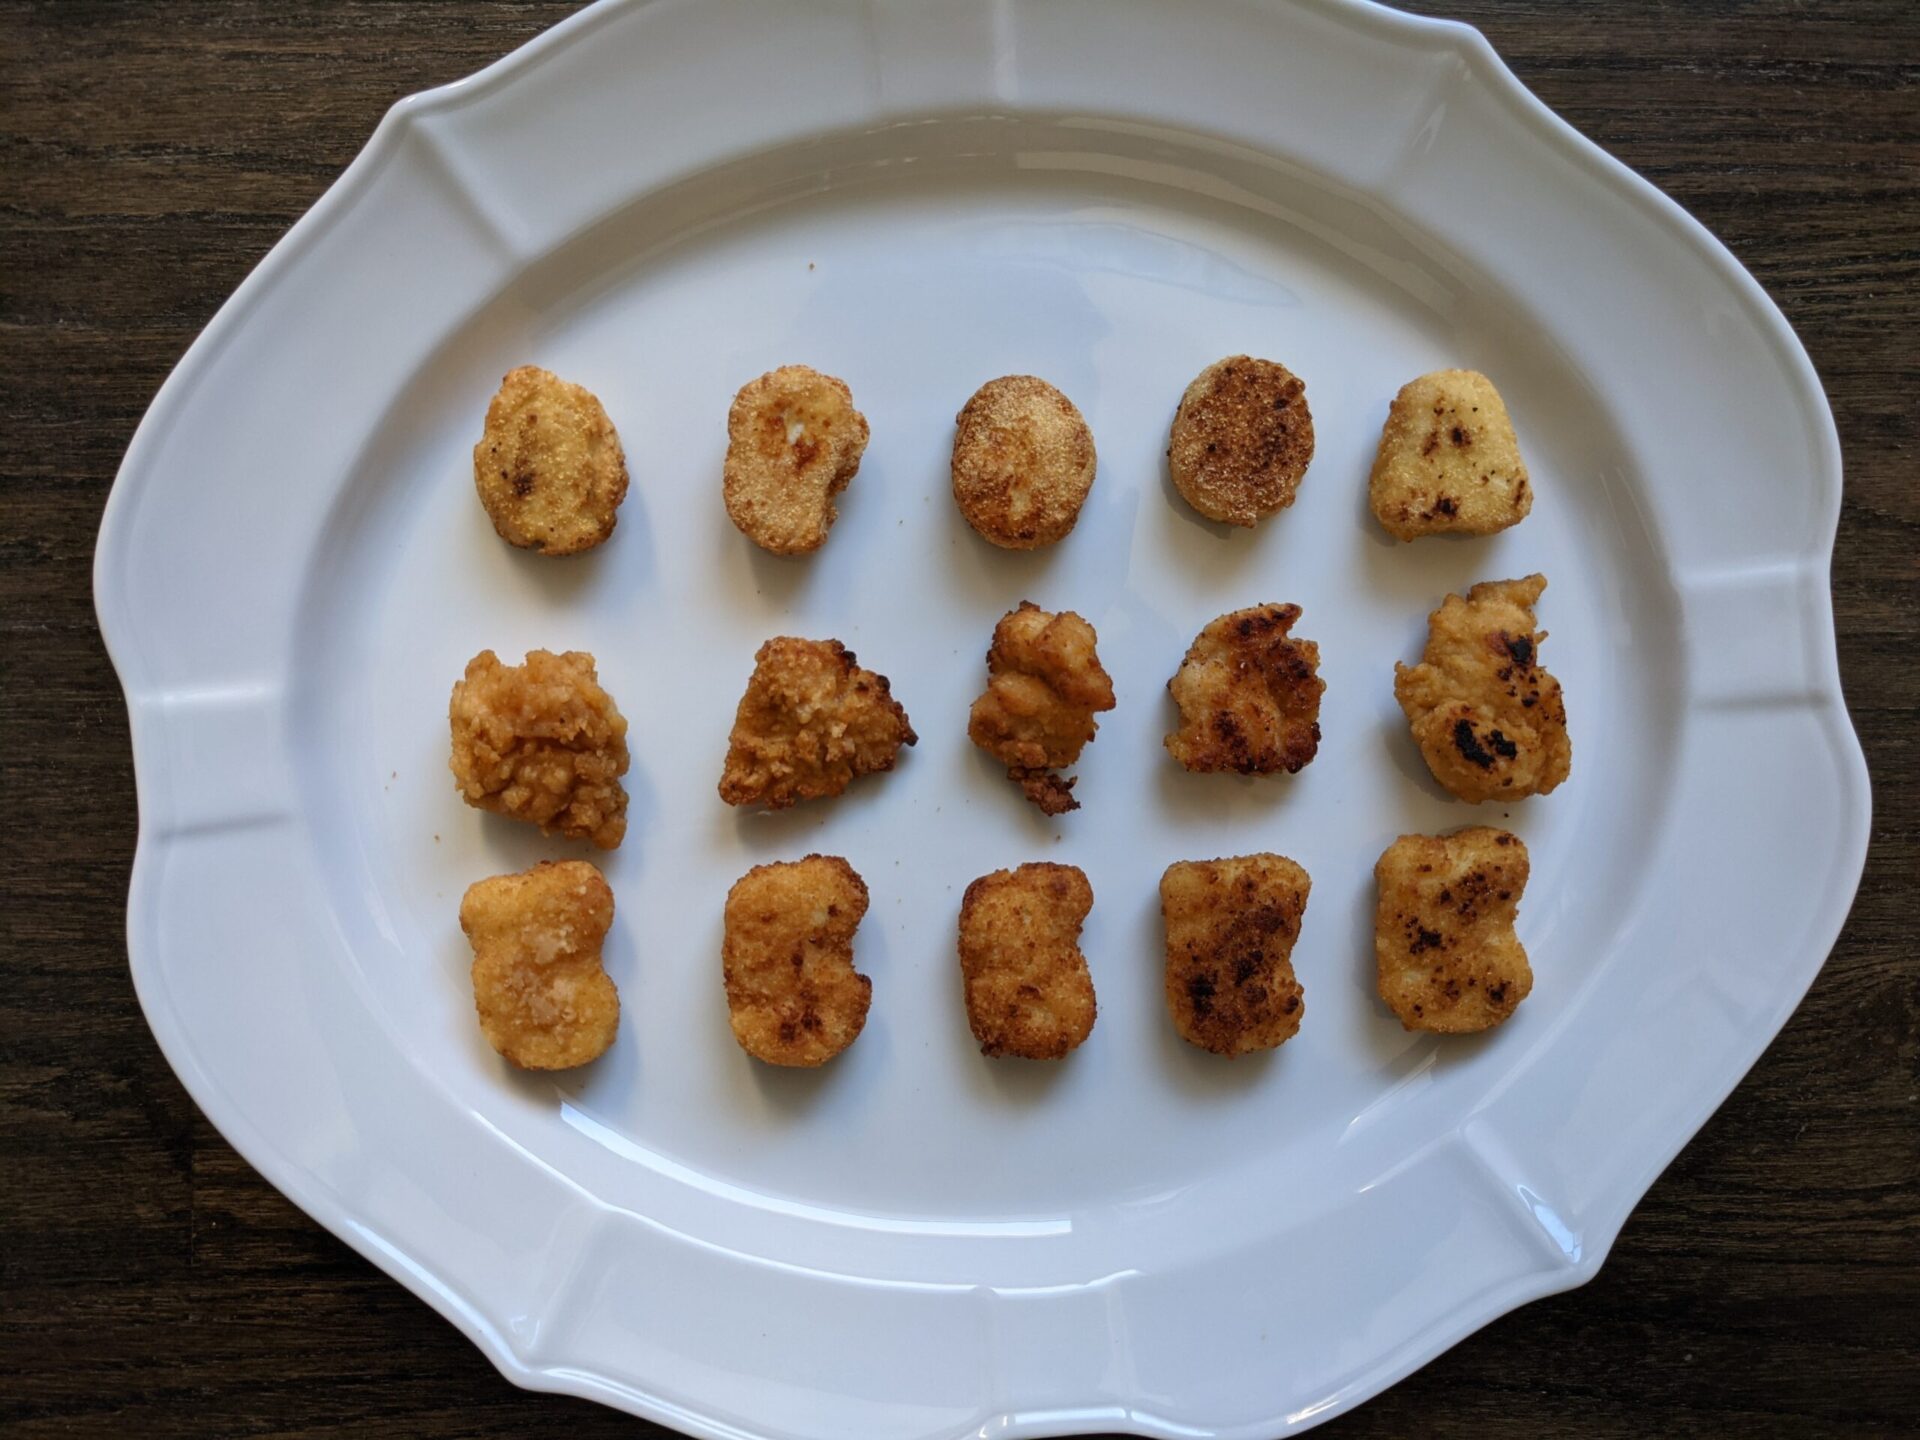 All the Costco Chicken Nuggets scaled